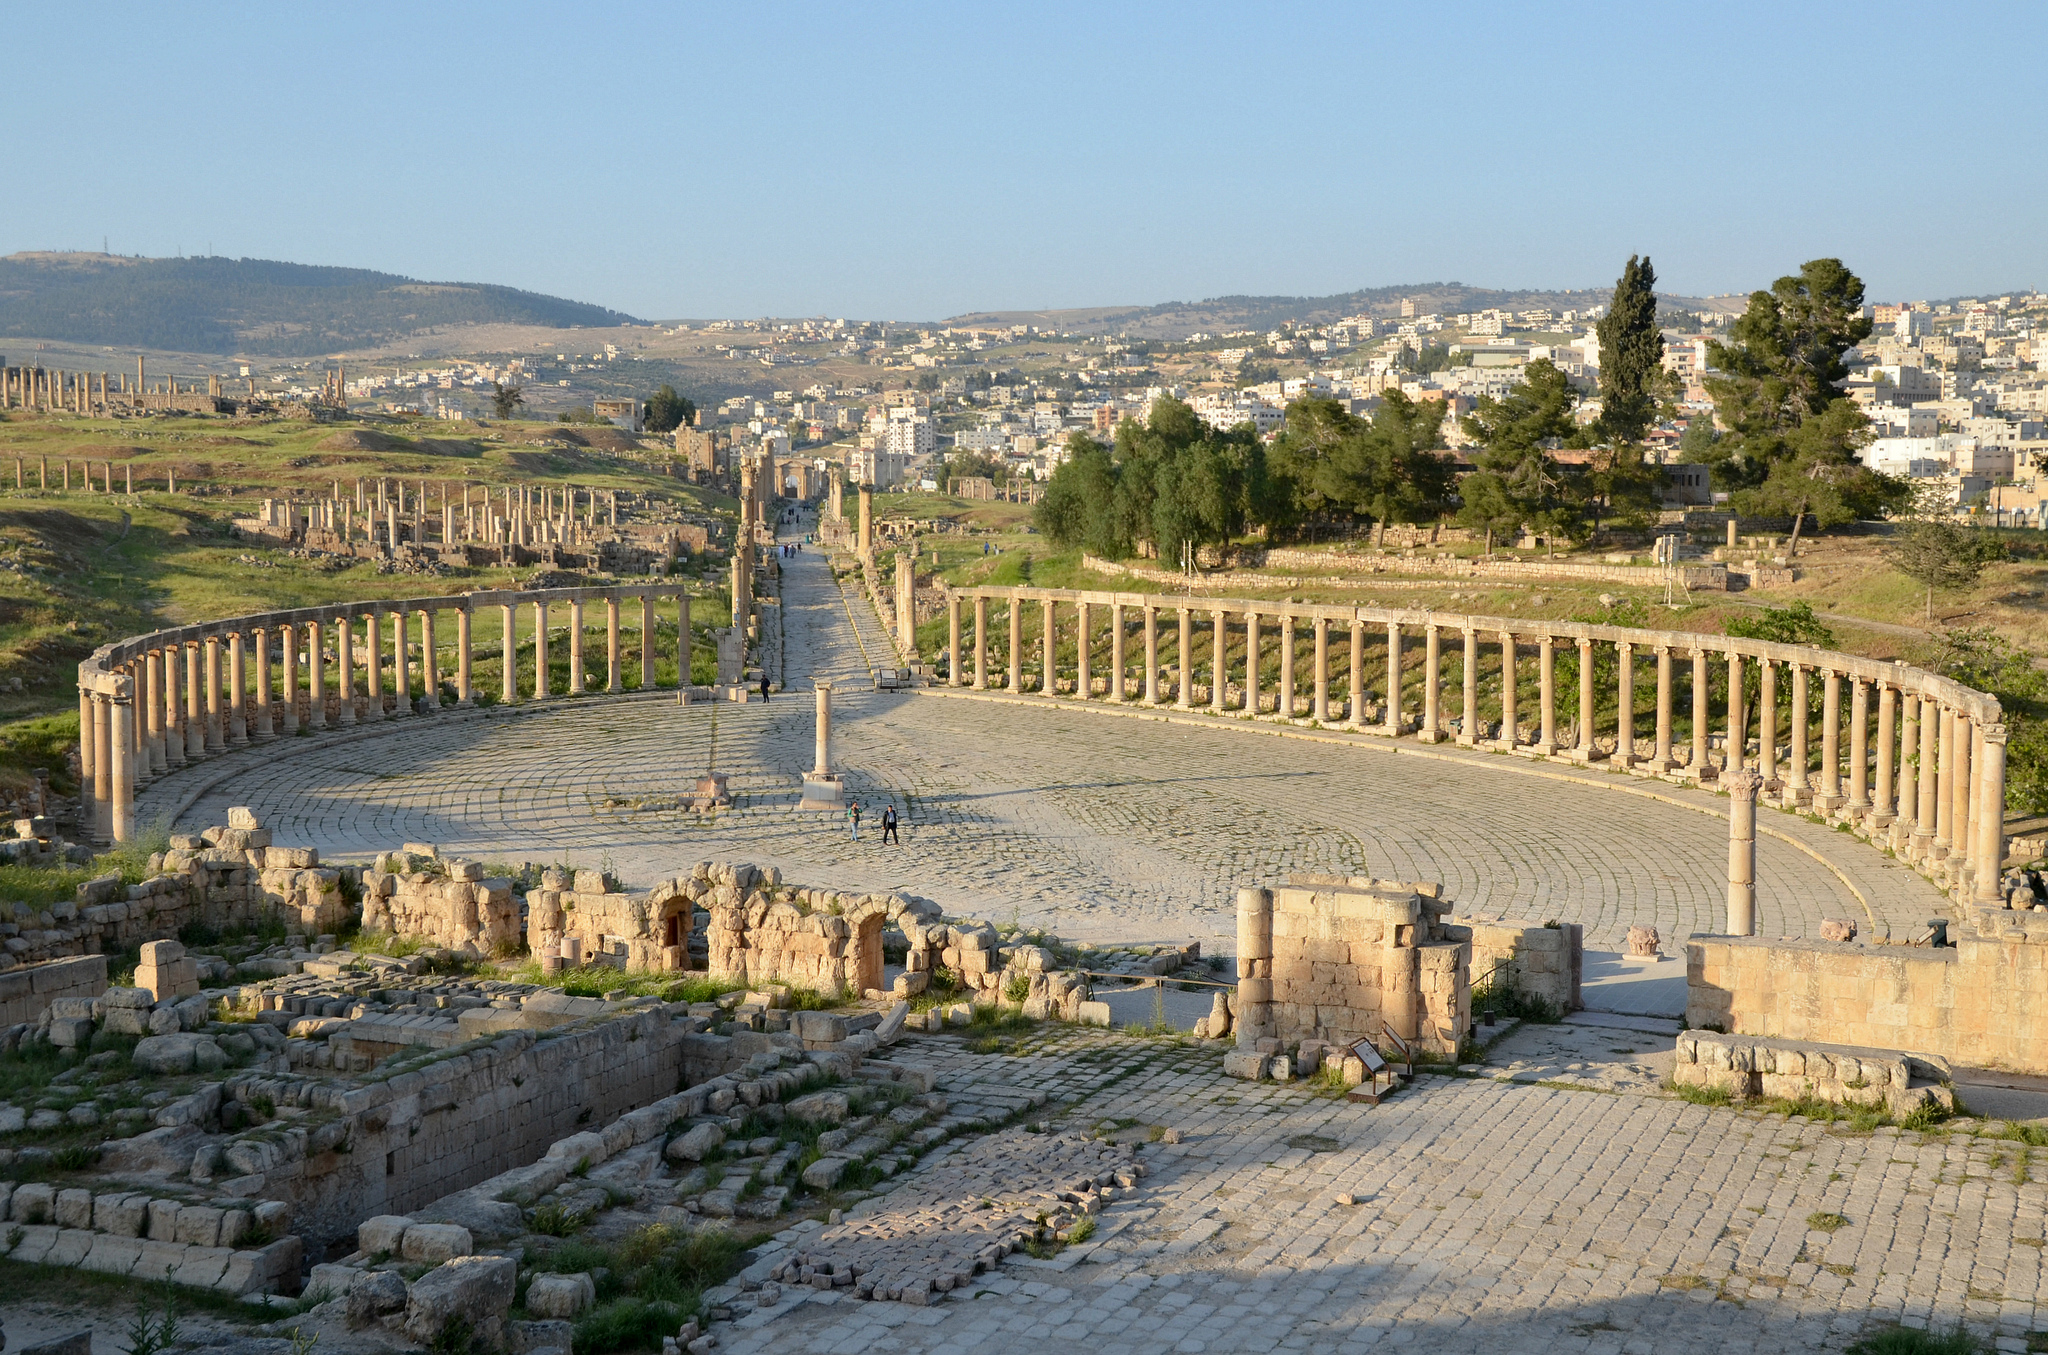 Jerash, also known as Gerasa in antiquity, is an ancient city located in North Jordan